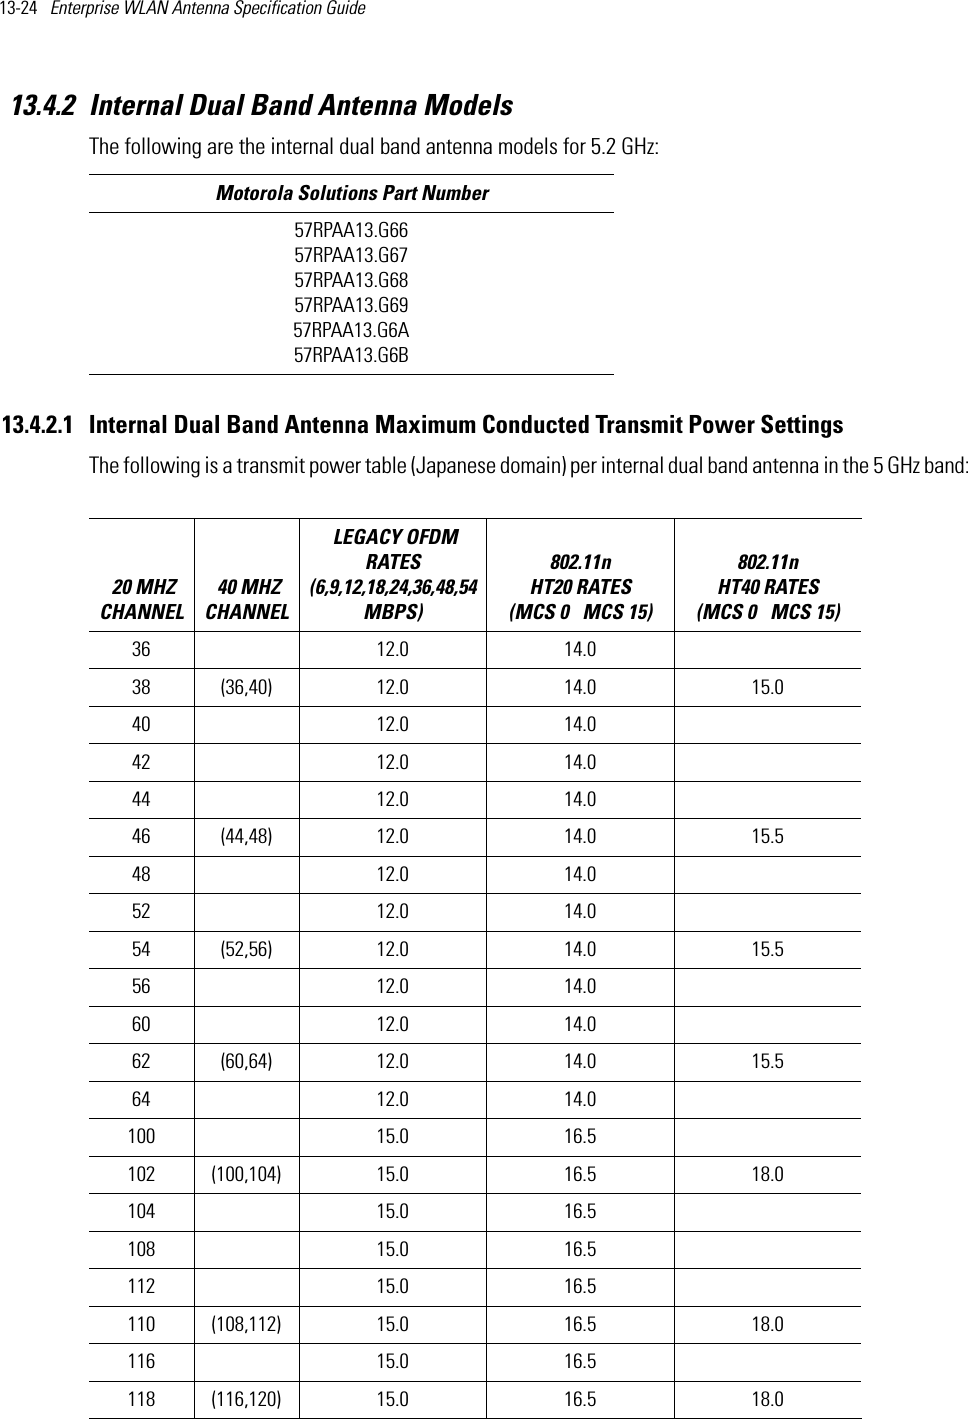 13-24   Enterprise WLAN Antenna Specification Guide 13.4.2 Internal Dual Band Antenna ModelsThe following are the internal dual band antenna models for 5.2 GHz:13.4.2.1 Internal Dual Band Antenna Maximum Conducted Transmit Power SettingsThe following is a transmit power table (Japanese domain) per internal dual band antenna in the 5 GHz band: Motorola Solutions Part Number57RPAA13.G66 57RPAA13.G6757RPAA13.G6857RPAA13.G6957RPAA13.G6A57RPAA13.G6B 20 MHZ CHANNEL 40 MHZ CHANNEL LEGACY OFDM RATES (6,9,12,18,24,36,48,54 MBPS) 802.11n HT20 RATES (MCS 0   MCS 15)802.11n HT40 RATES (MCS 0   MCS 15) 36 12.0 14.0  38 (36,40) 12.0 14.0 15.040 12.0 14.0  42 12.0 14.0  44 12.0 14.0  46 (44,48) 12.0 14.0 15.5 48 12.0 14.0  52 12.0 14.0  54 (52,56) 12.0 14.0 15.556 12.0 14.0  60 12.0 14.0  62 (60,64) 12.0 14.0 15.564 12.0 14.0  100 15.0 16.5  102 (100,104) 15.0 16.5 18.0104 15.0 16.5  108 15.0 16.5  112 15.0 16.5  110 (108,112) 15.0 16.5 18.0116 15.0 16.5  118 (116,120) 15.0 16.5 18.0